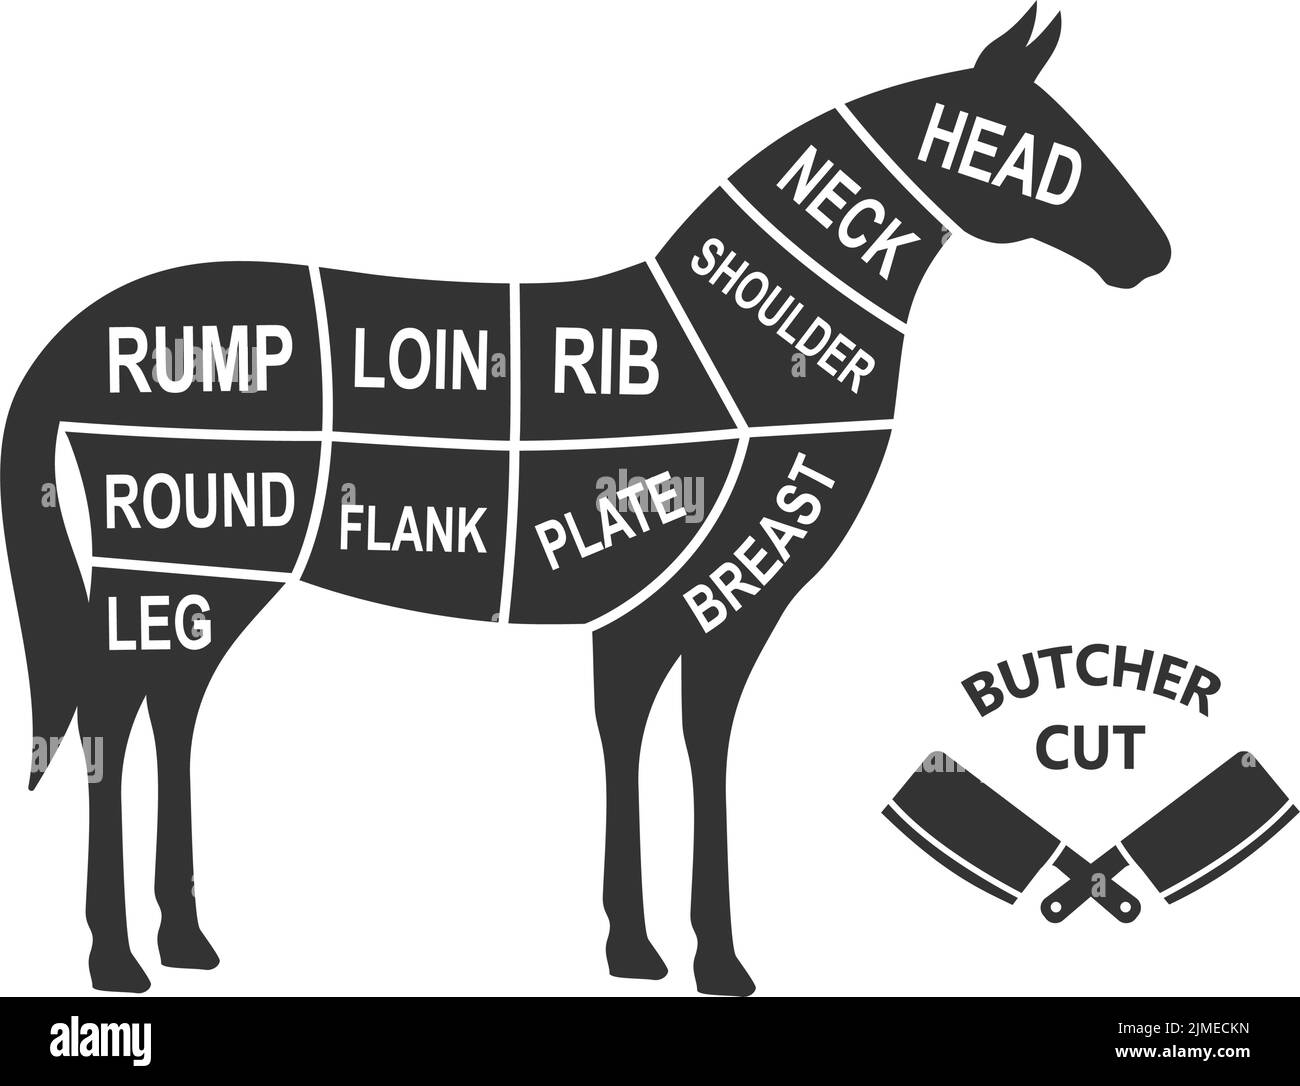 Horse scheme cuts. Butcher diagram poster. Meat diagram scheme illustration. Cuts of horse meat. Farm animal silhouette. Stock Vector